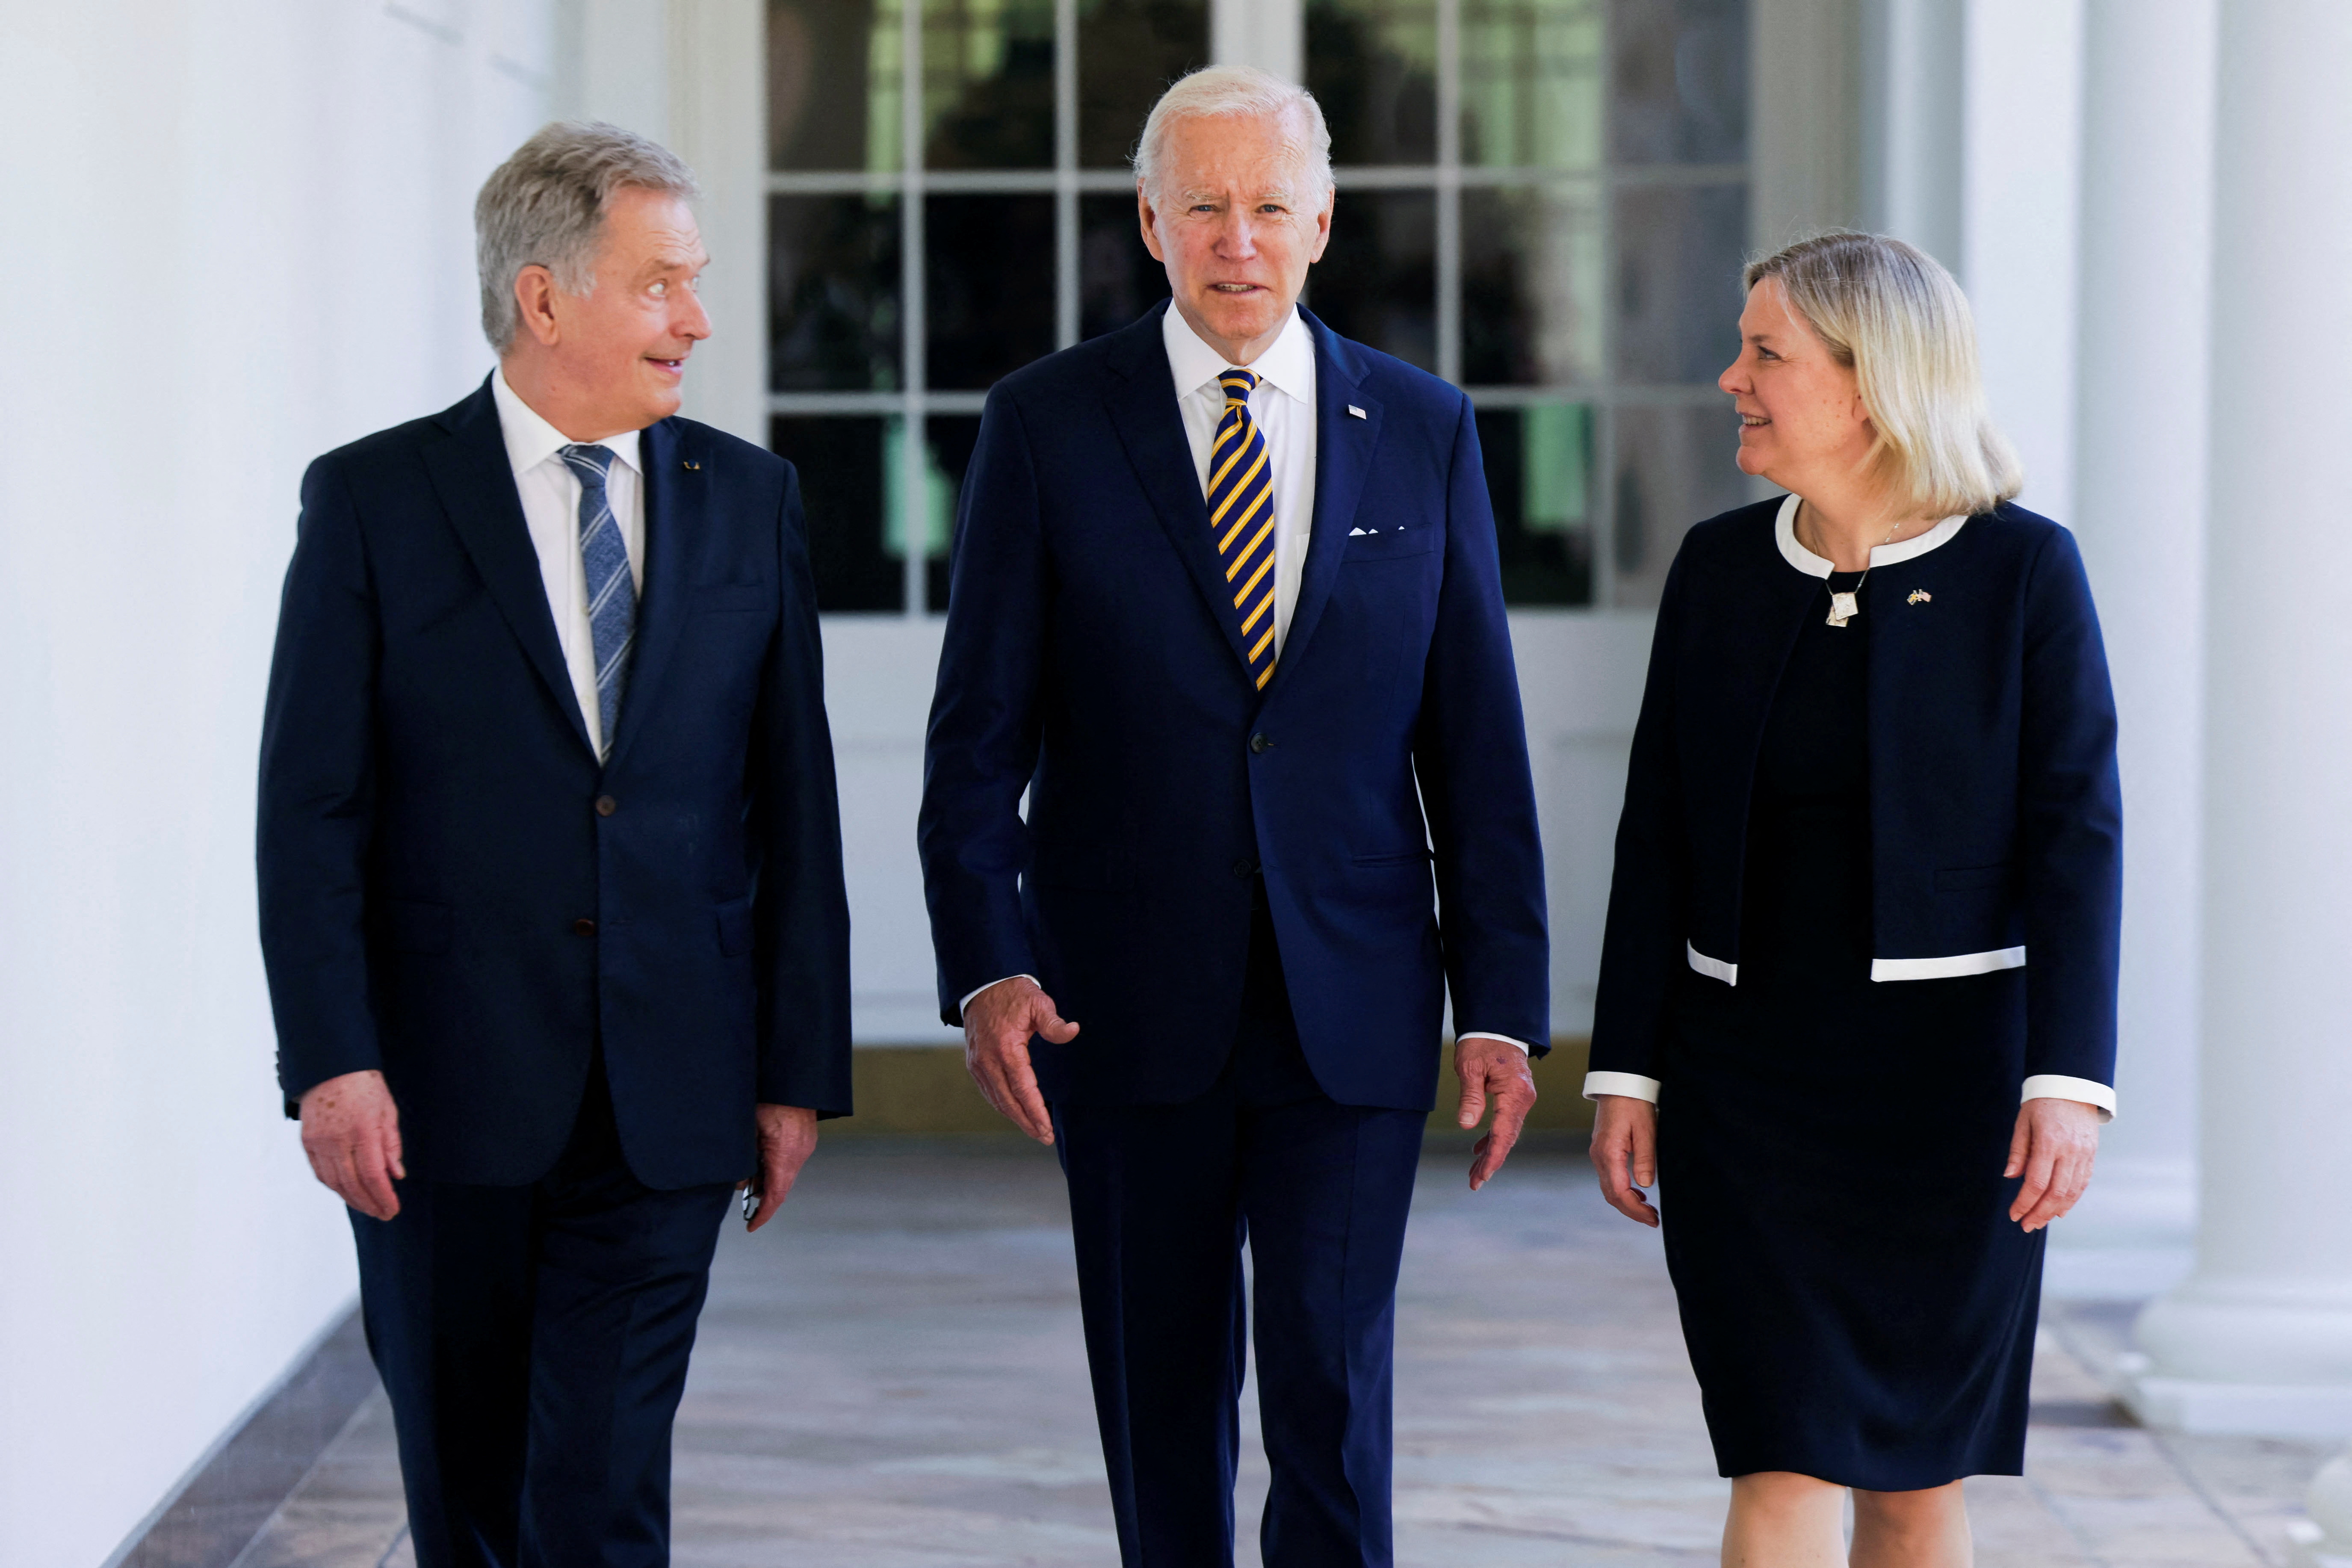 U.S. President Biden meets with Sweden's Prime Minister Andersson and Finland's President Niinisto in Washington